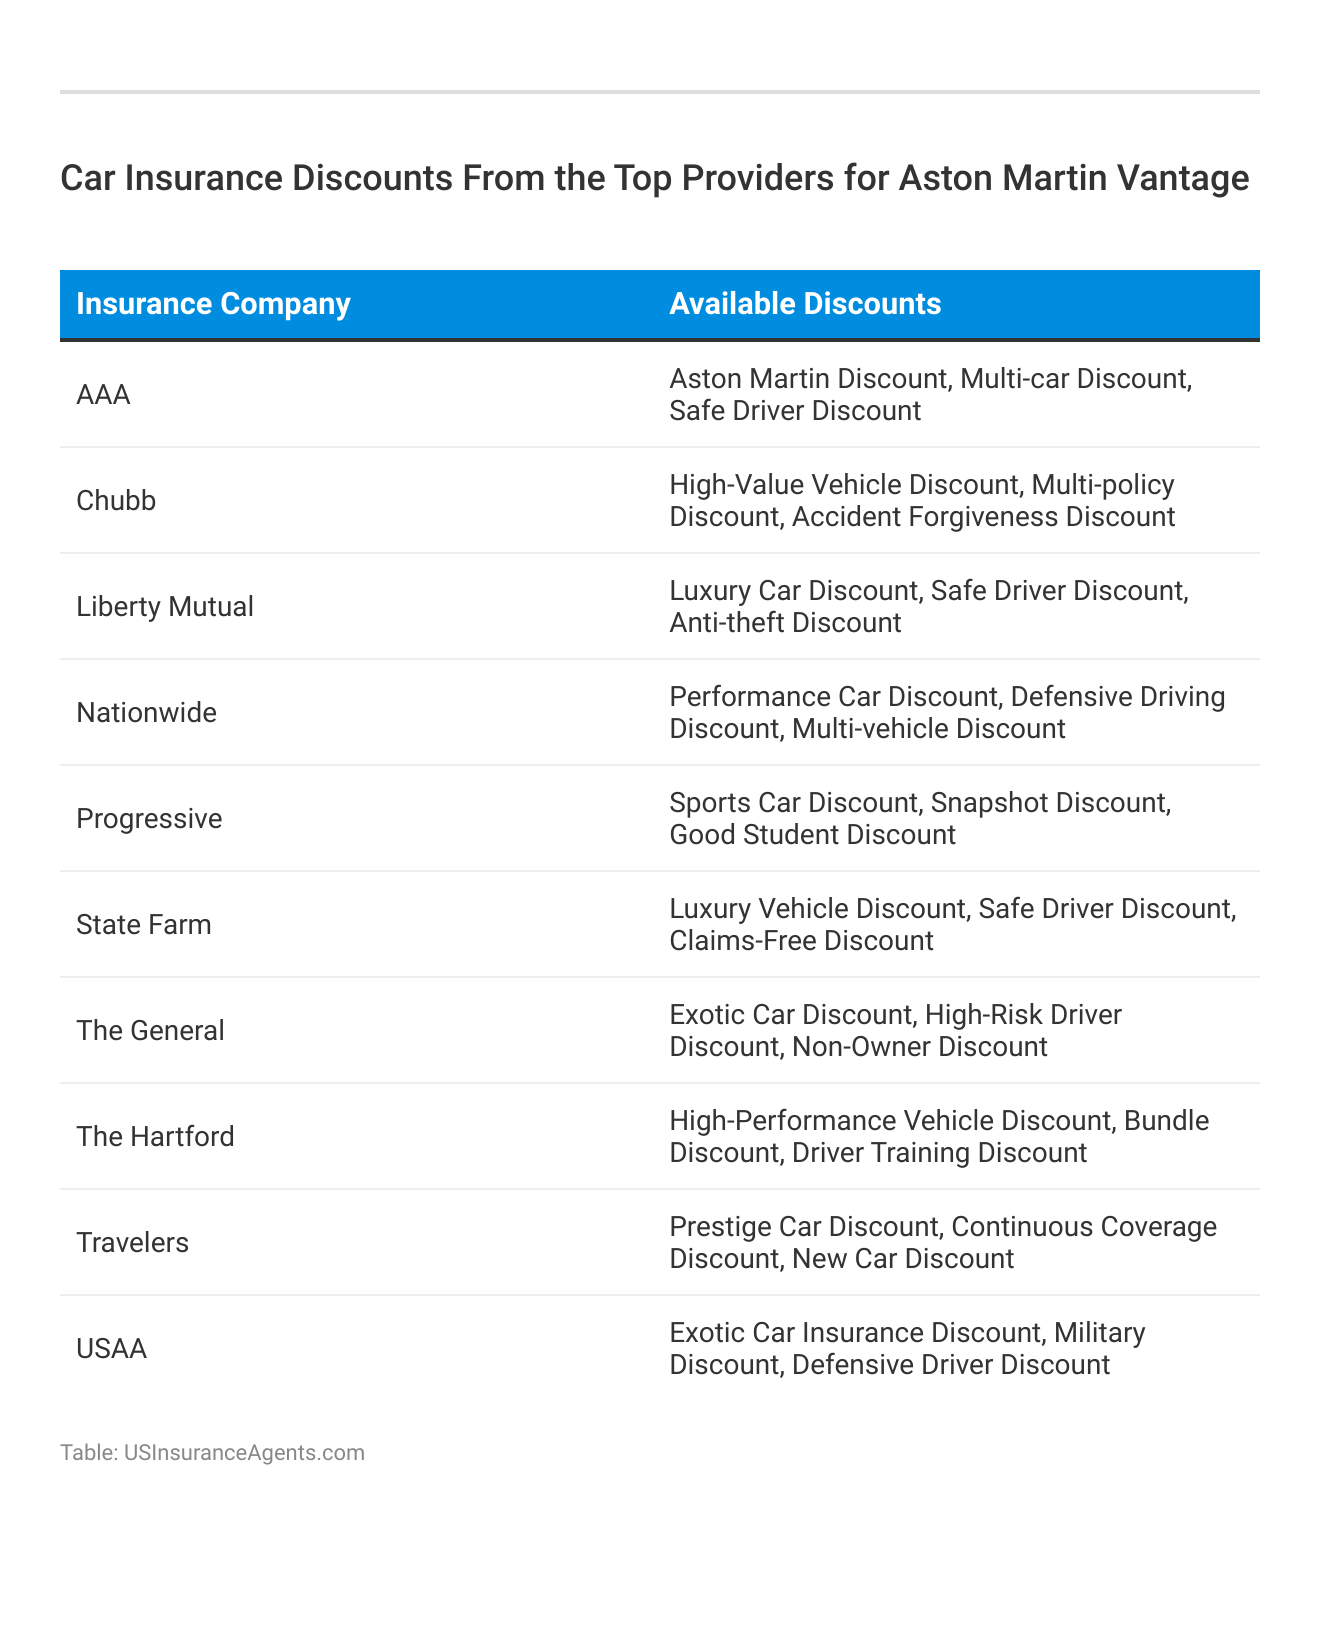 <h3>Car Insurance Discounts From the Top Providers for Aston Martin Vantage</h3>